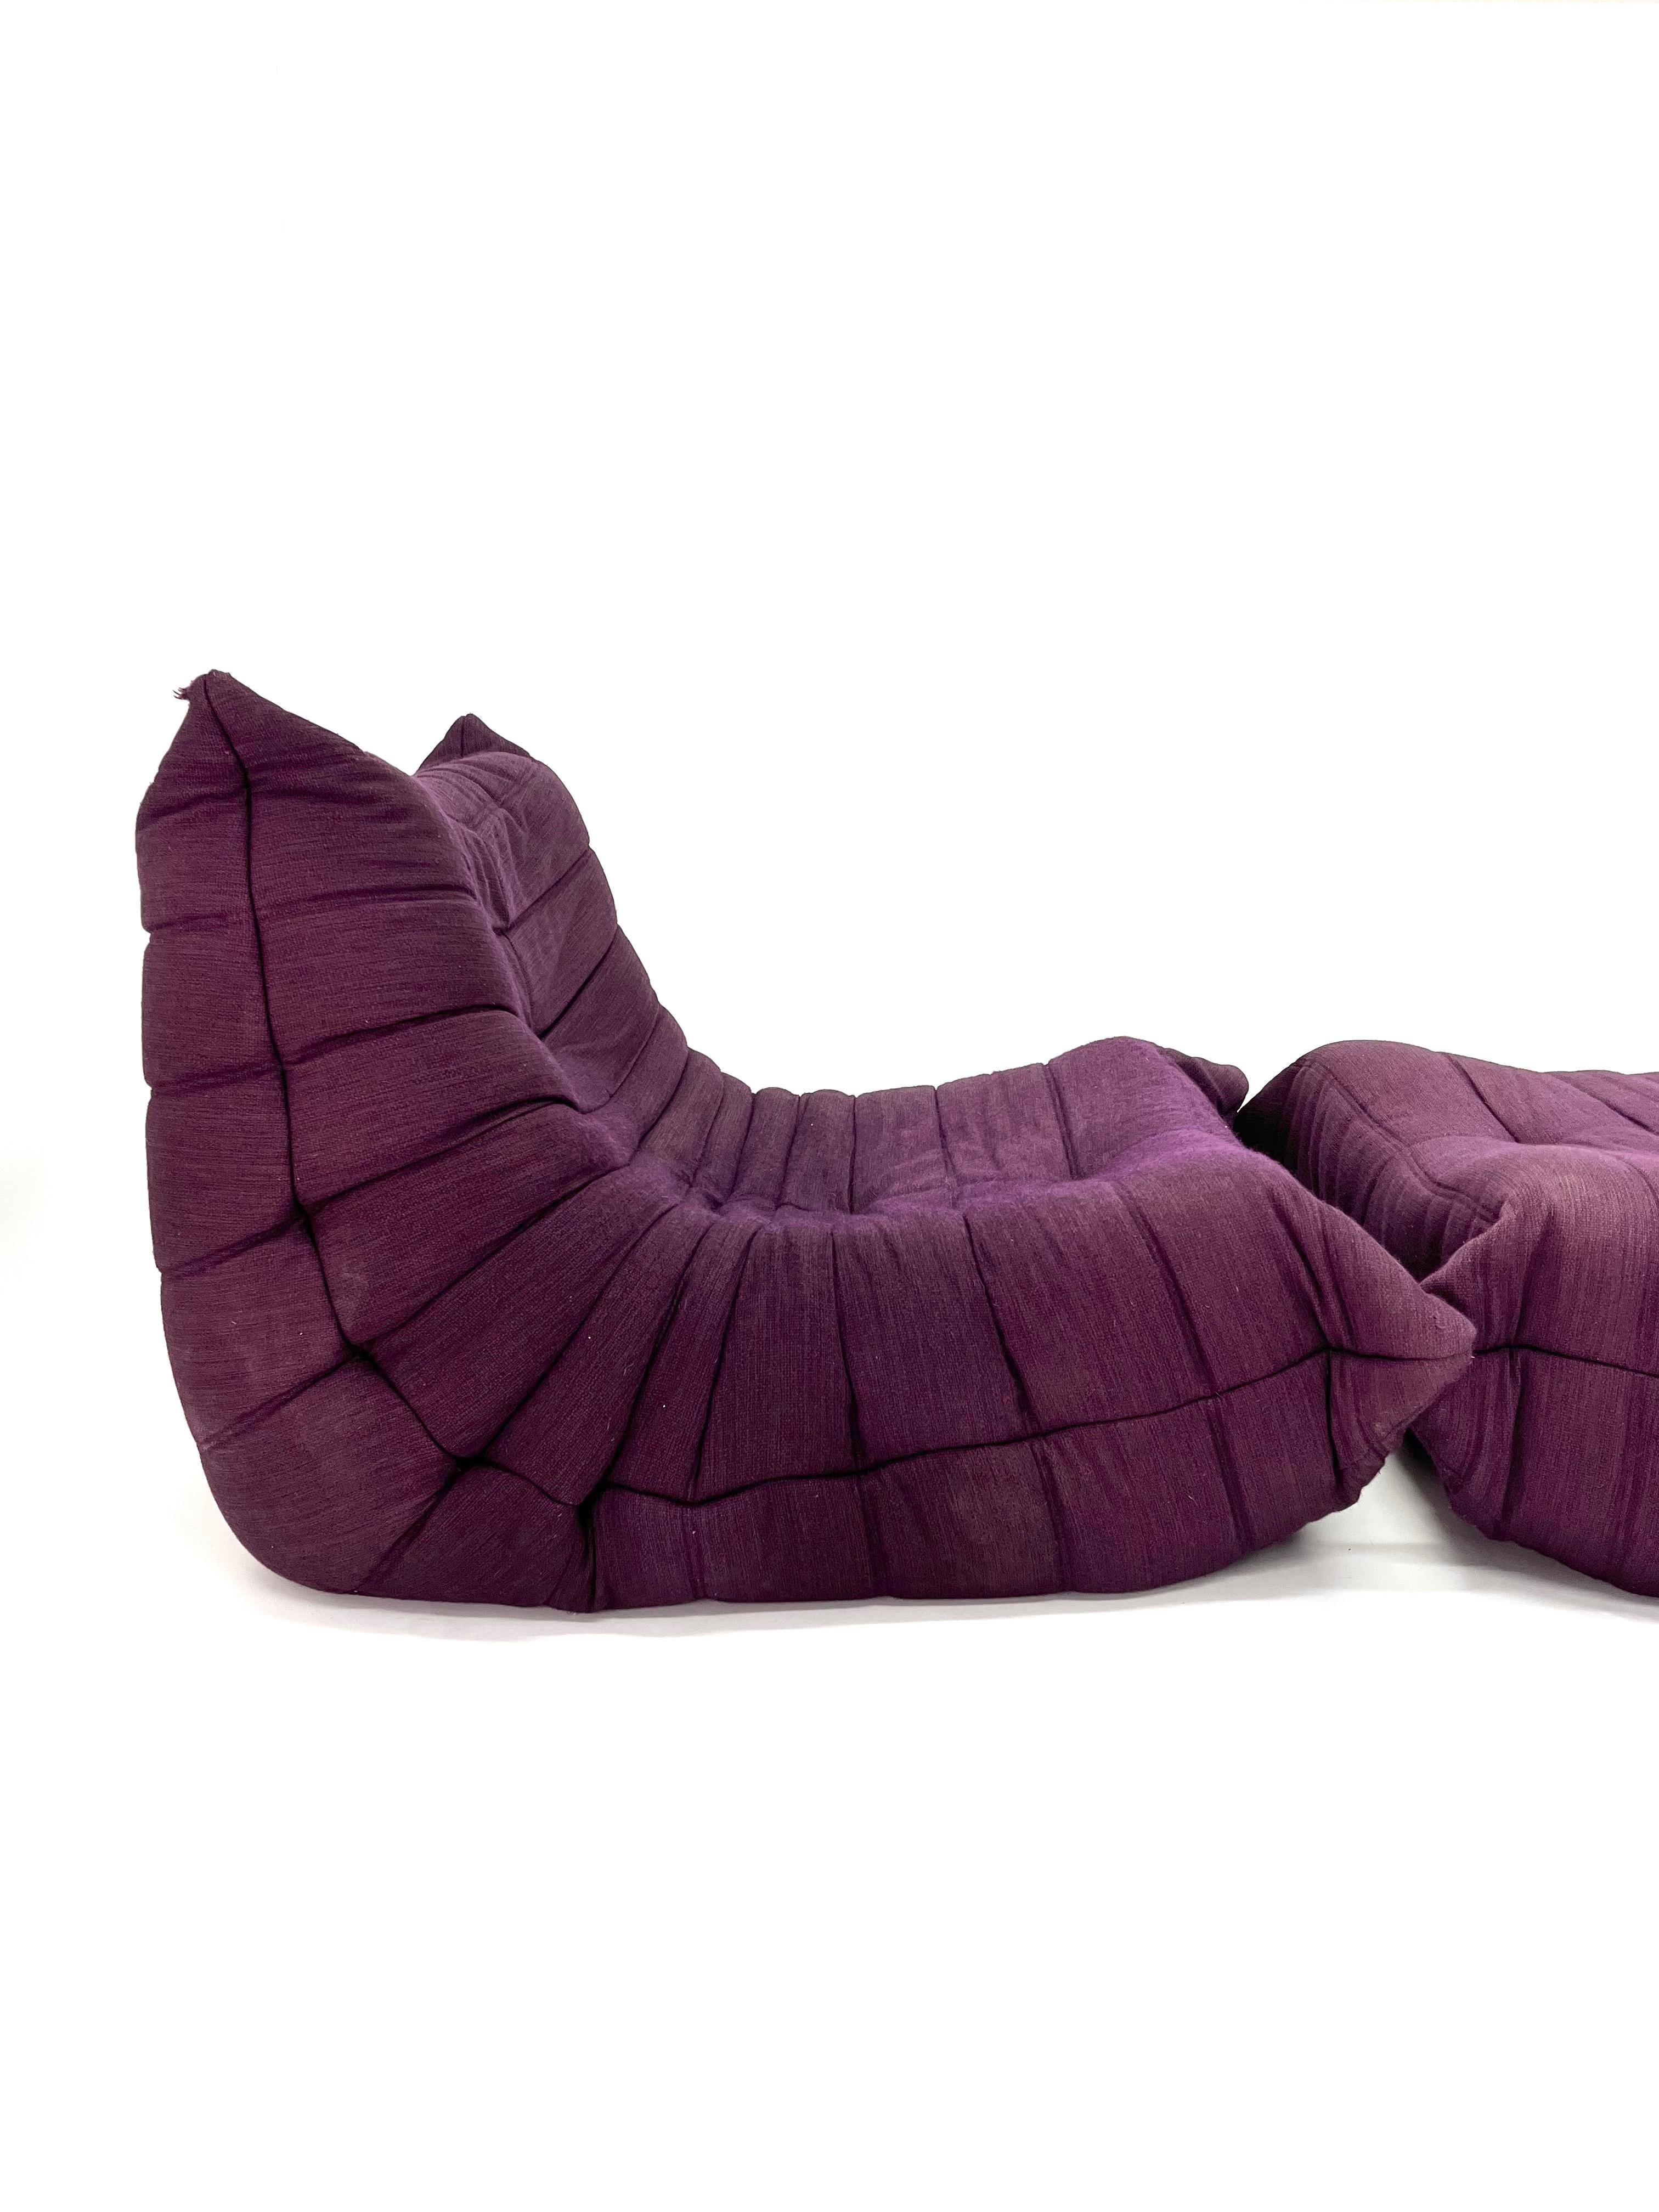 Togo Chair and Ottoman in Purple by Michel Ducaroy for Ligne Roset For Sale 4